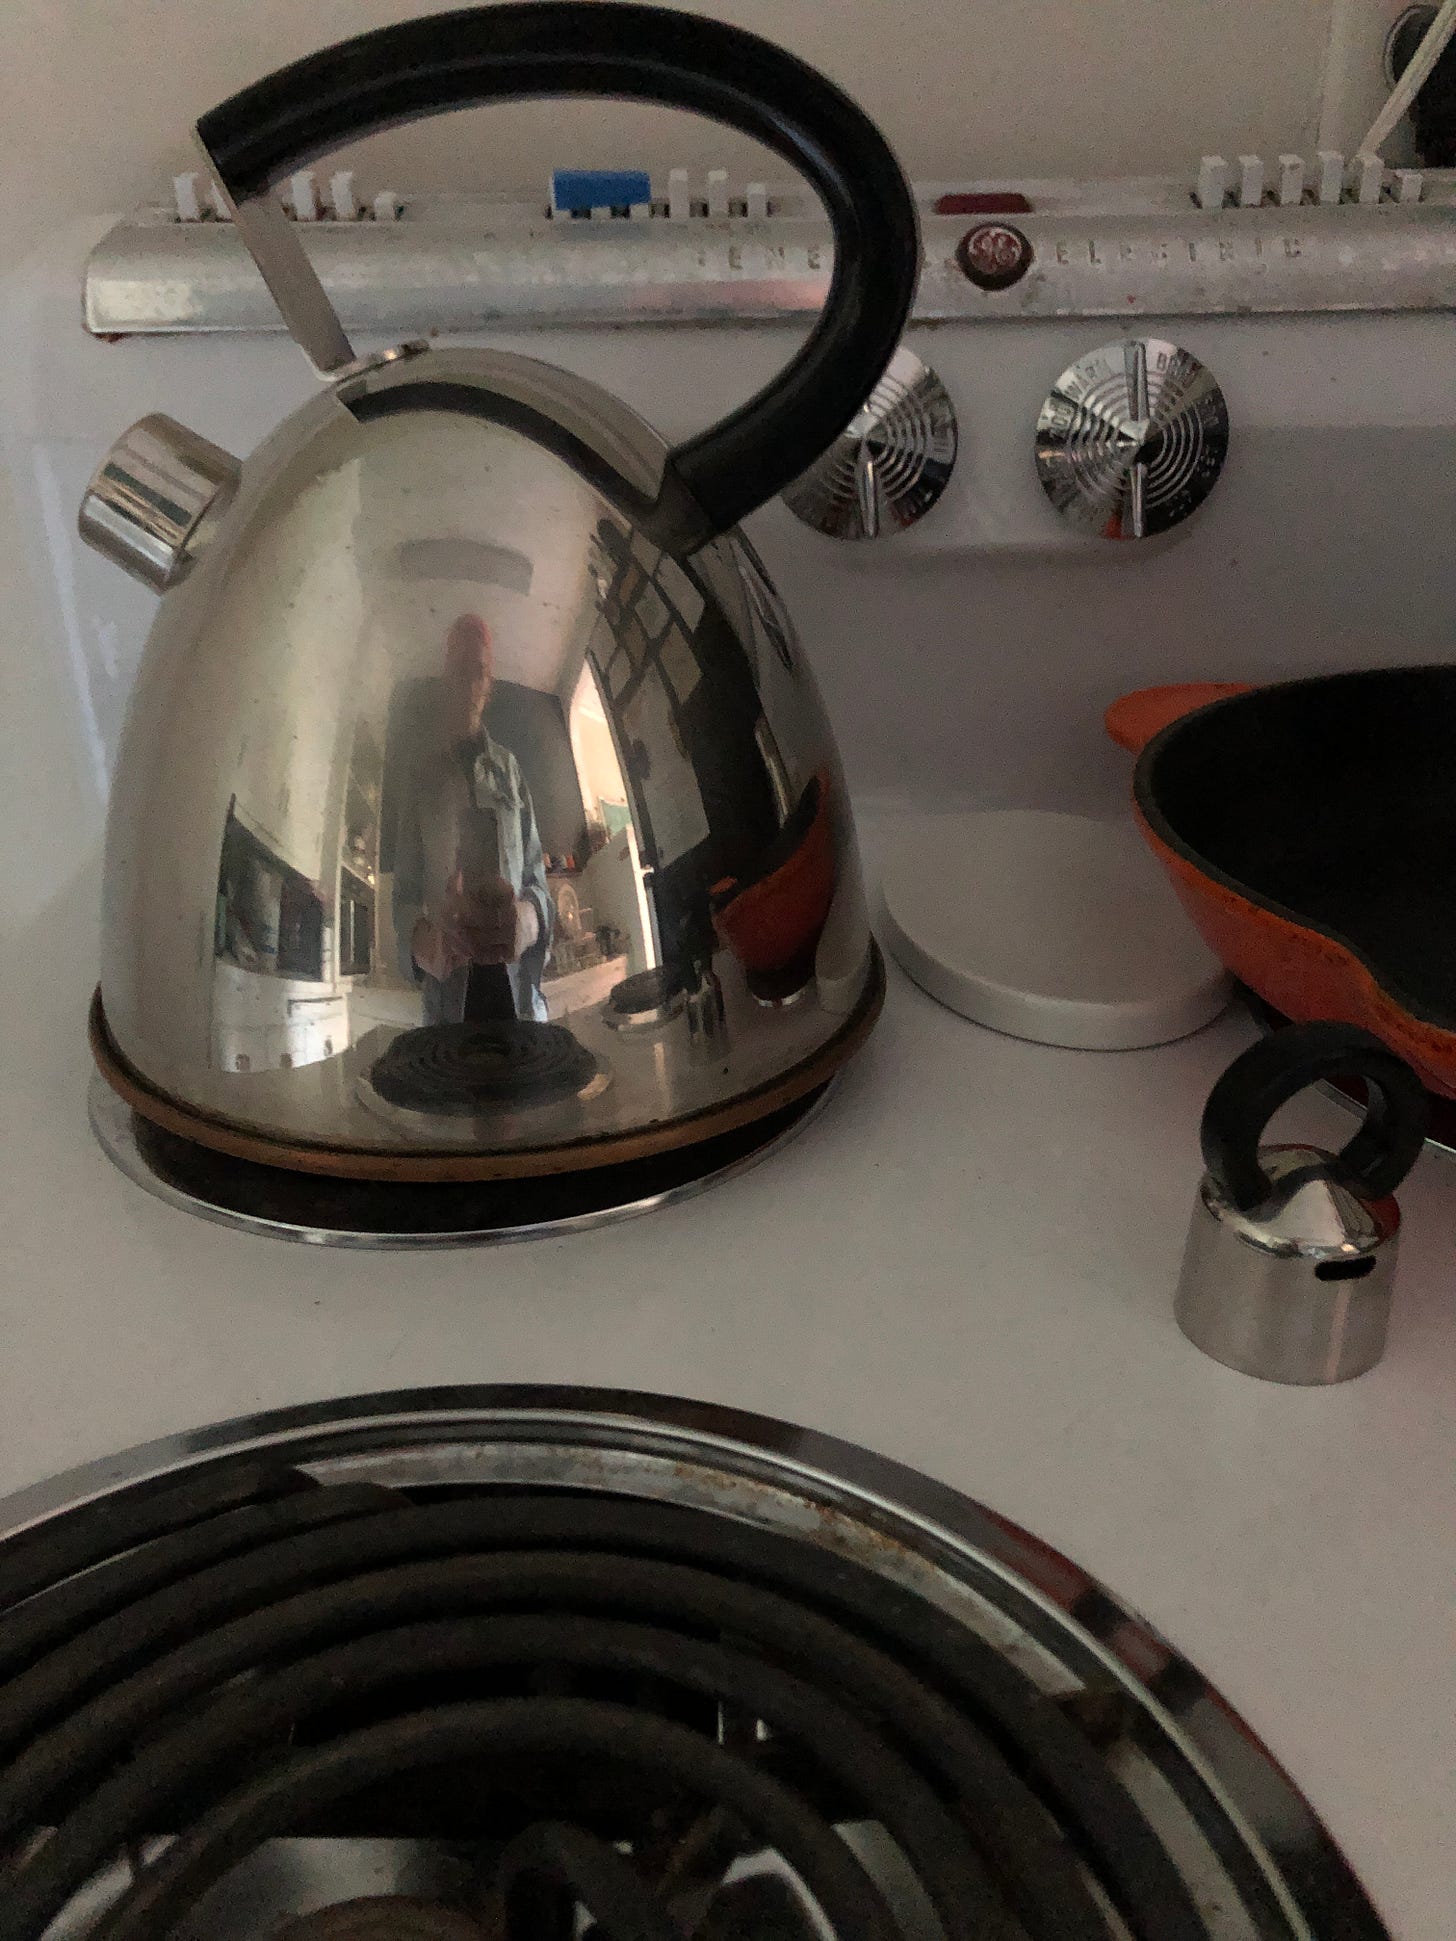 a stove with my reflection in a tea kettle